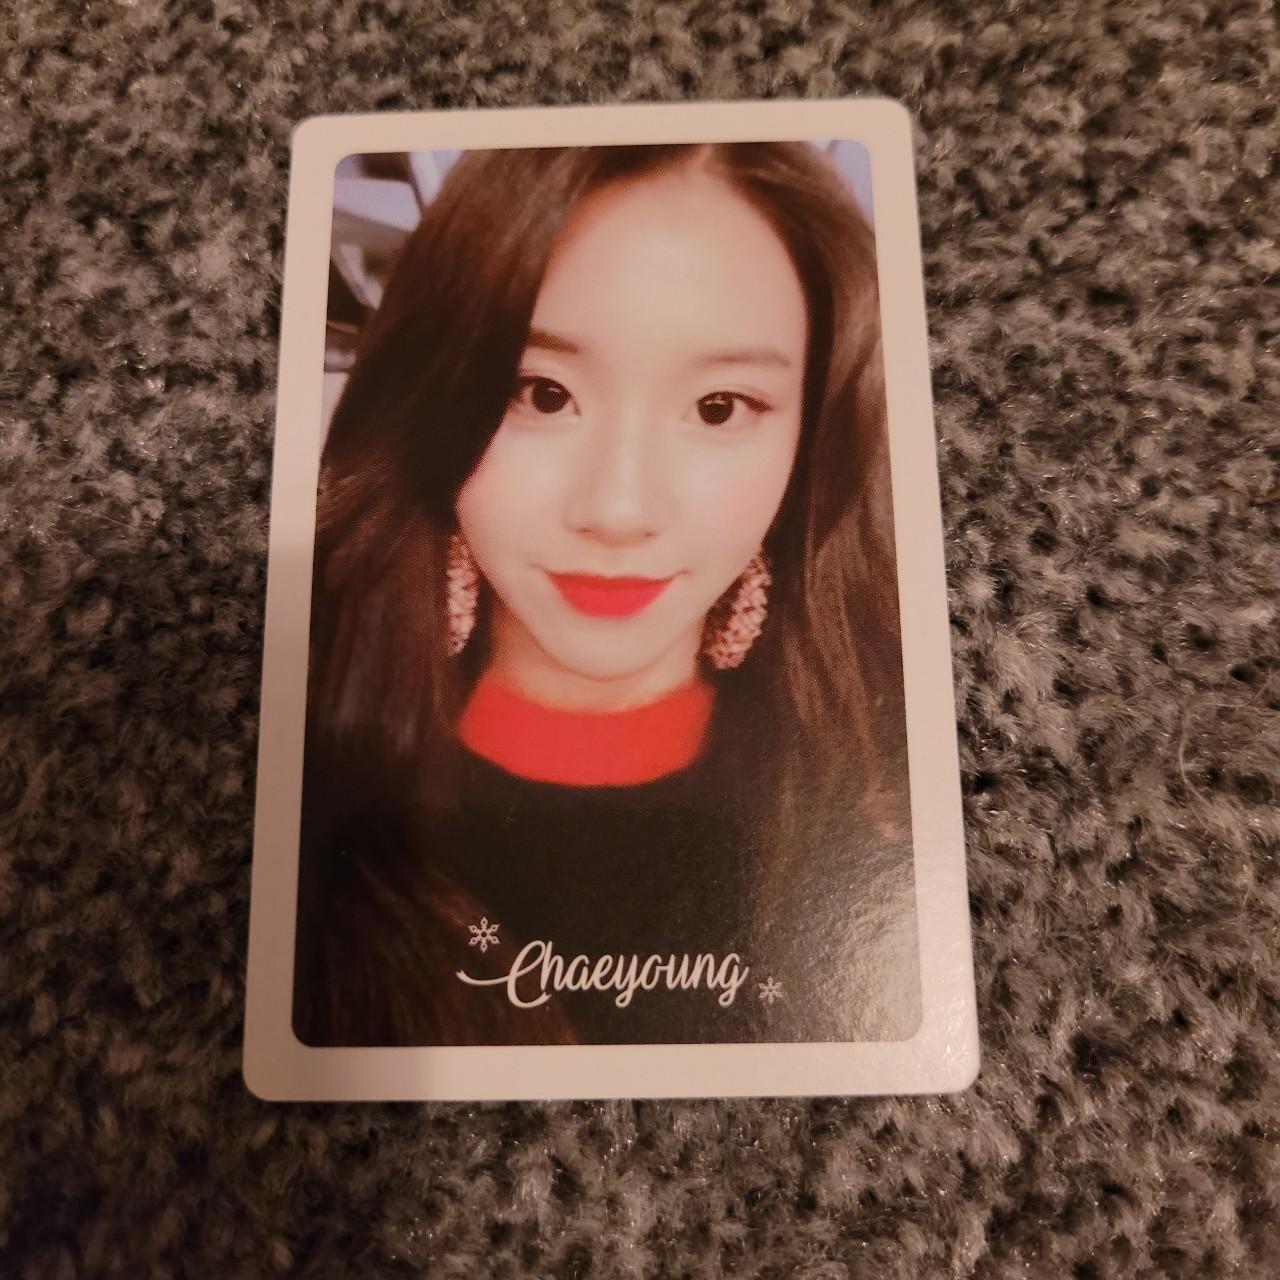 Product Image 1 - WTS/WTT
TWICE CHAEYOUNG PHOTOCARD 

UK only